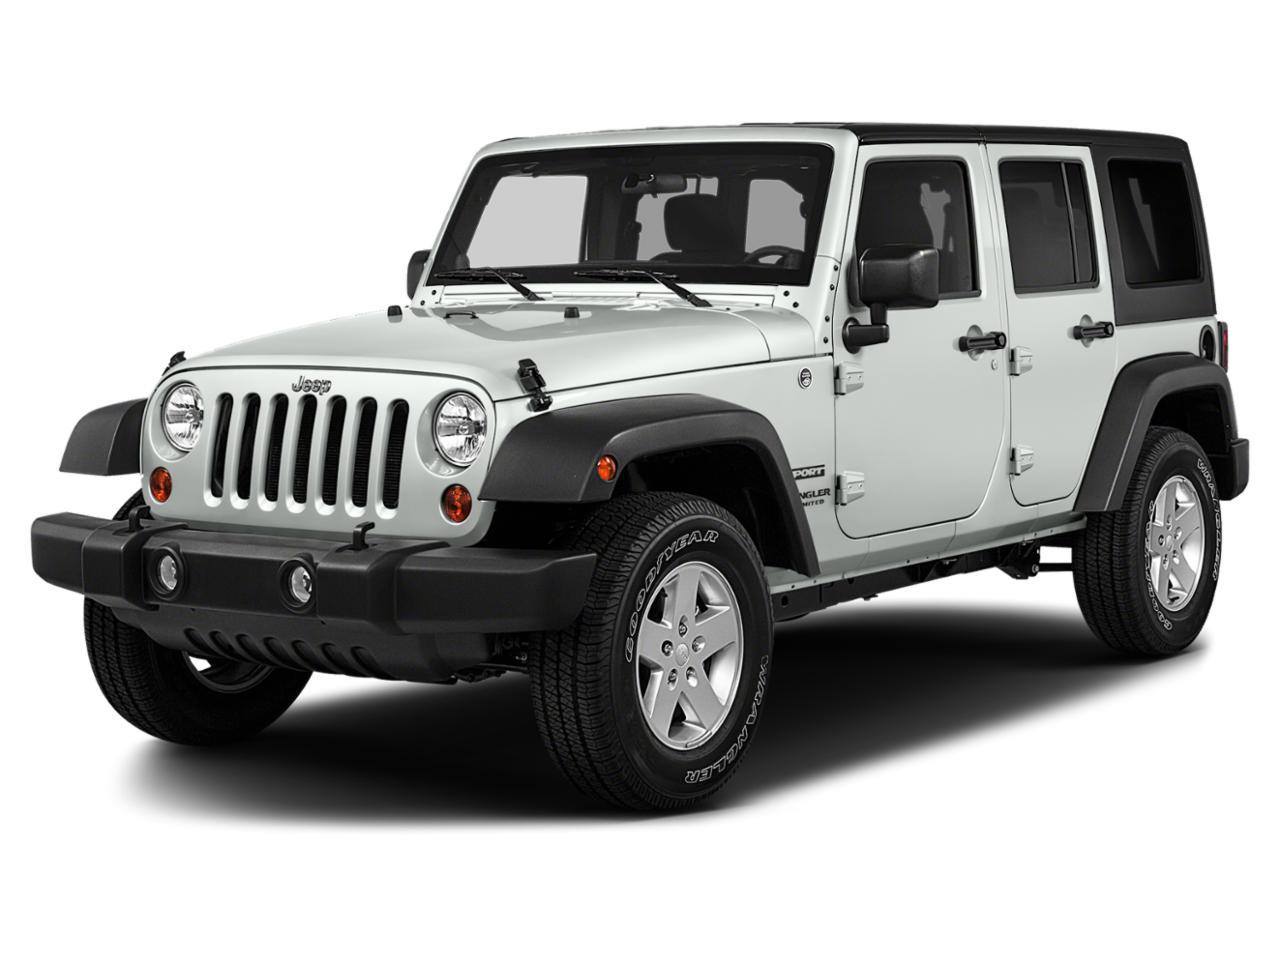 Used, Certified Jeep Wrangler JK Unlimited Vehicles for Sale in Columbia,  SC - Jim Hudson Buick GMC